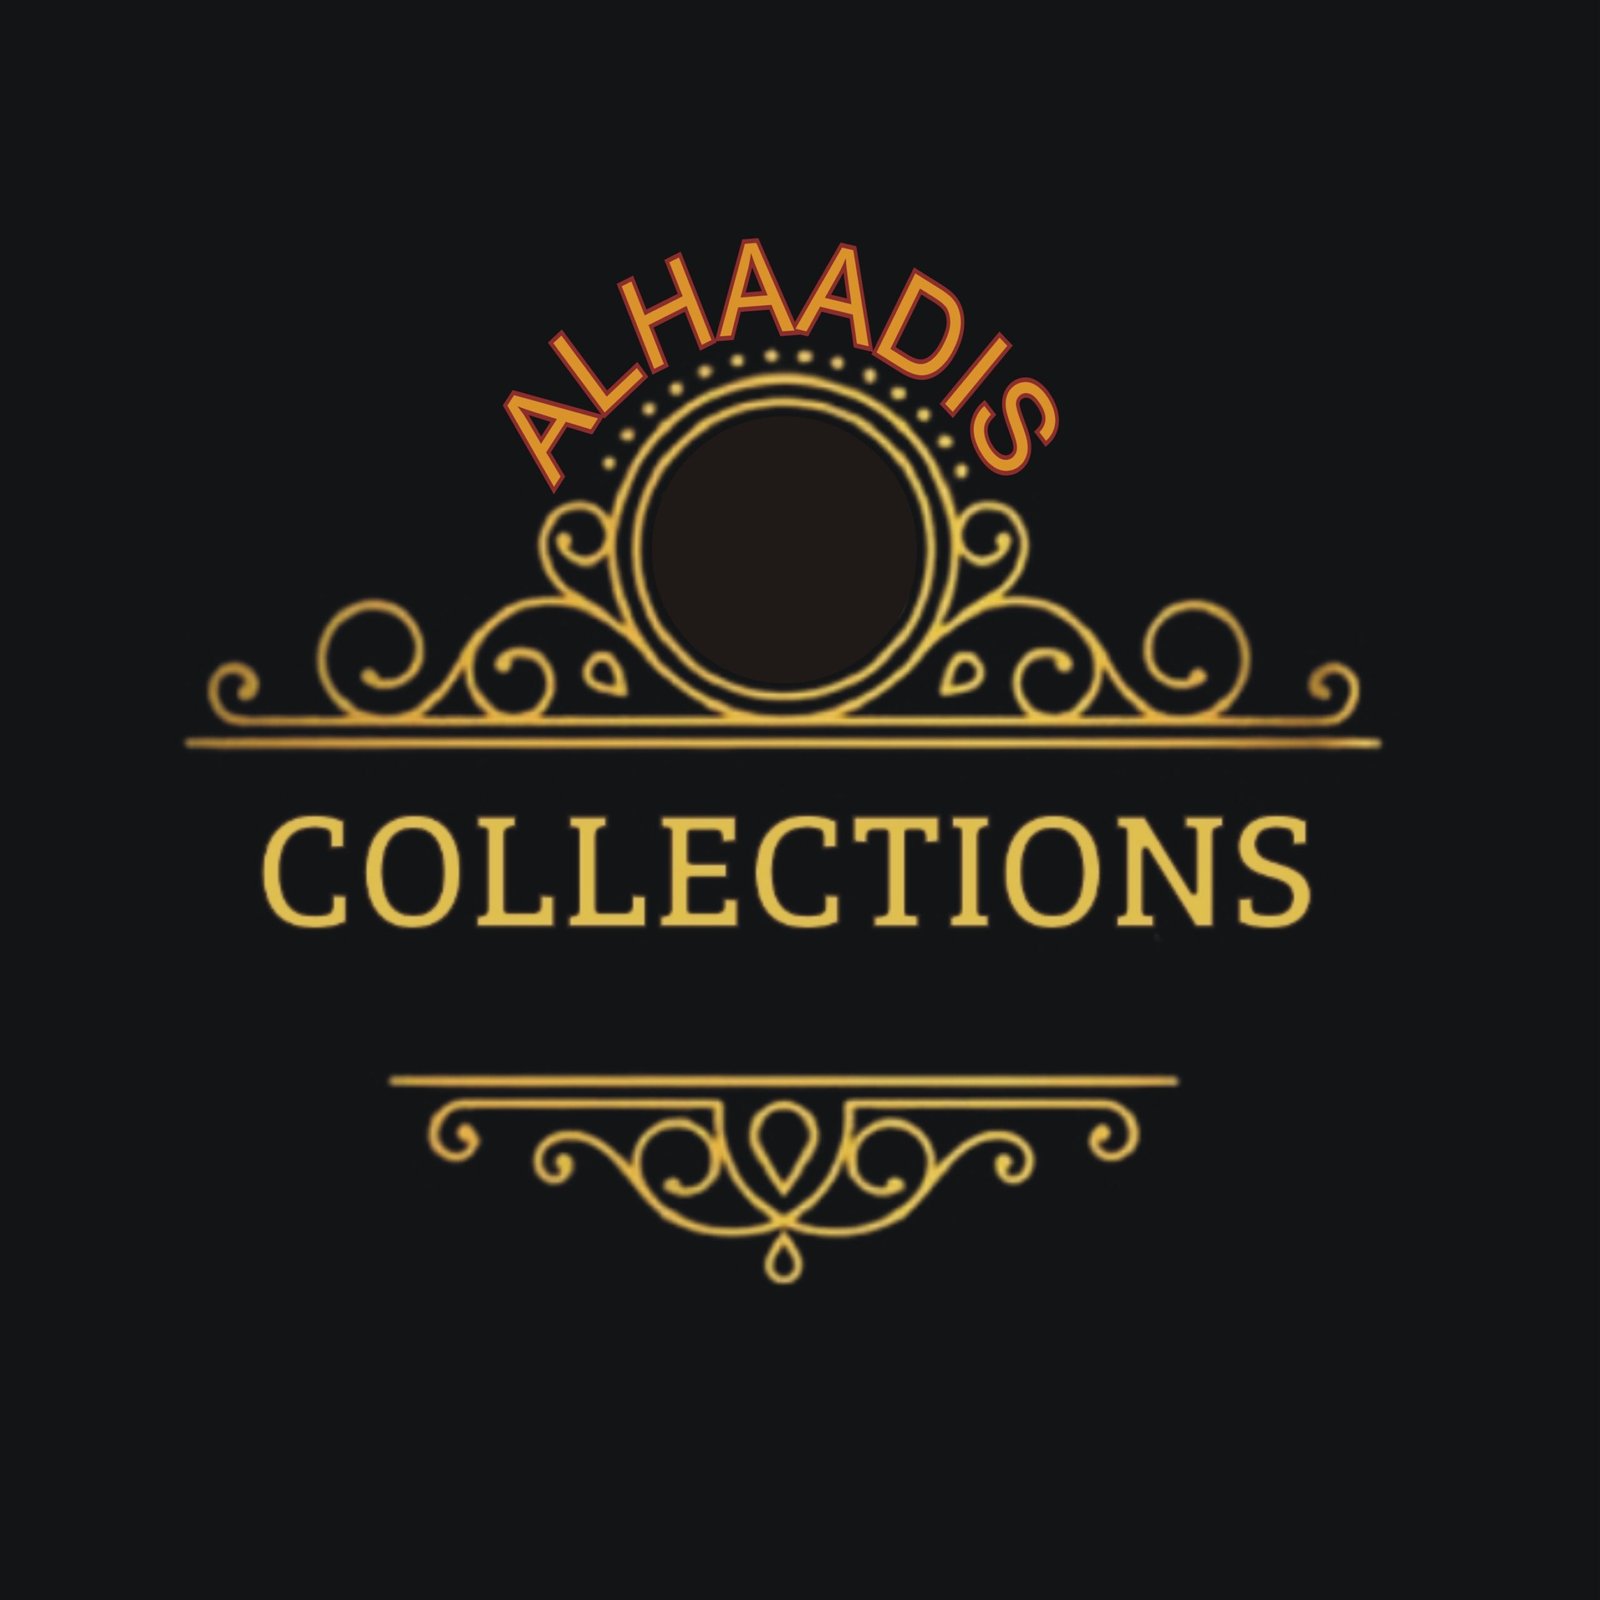 Alhaadi Collection